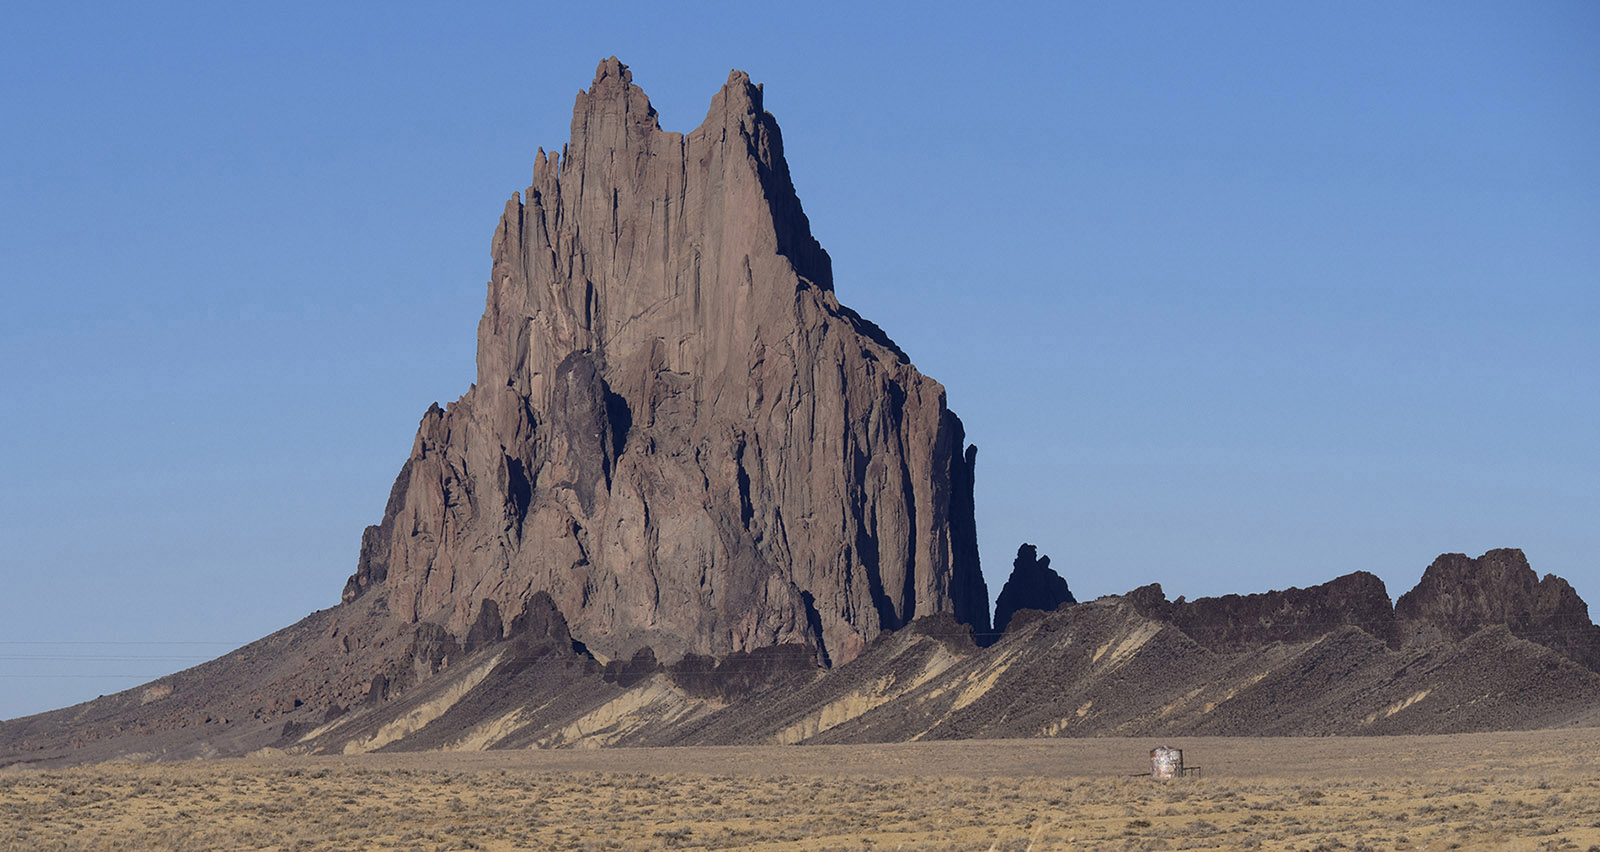 Shiprock, Shiprock NM:  This is a remnant of a diatreme (brecca filled volcanic vent formed by volcanic explosion) formed 25 -35 million years ago.  A volcanic dike extends South from the diatreme.  Erosion has resulted in removal of approximately 3,000 feet soil and volcanic material around the diatreme.